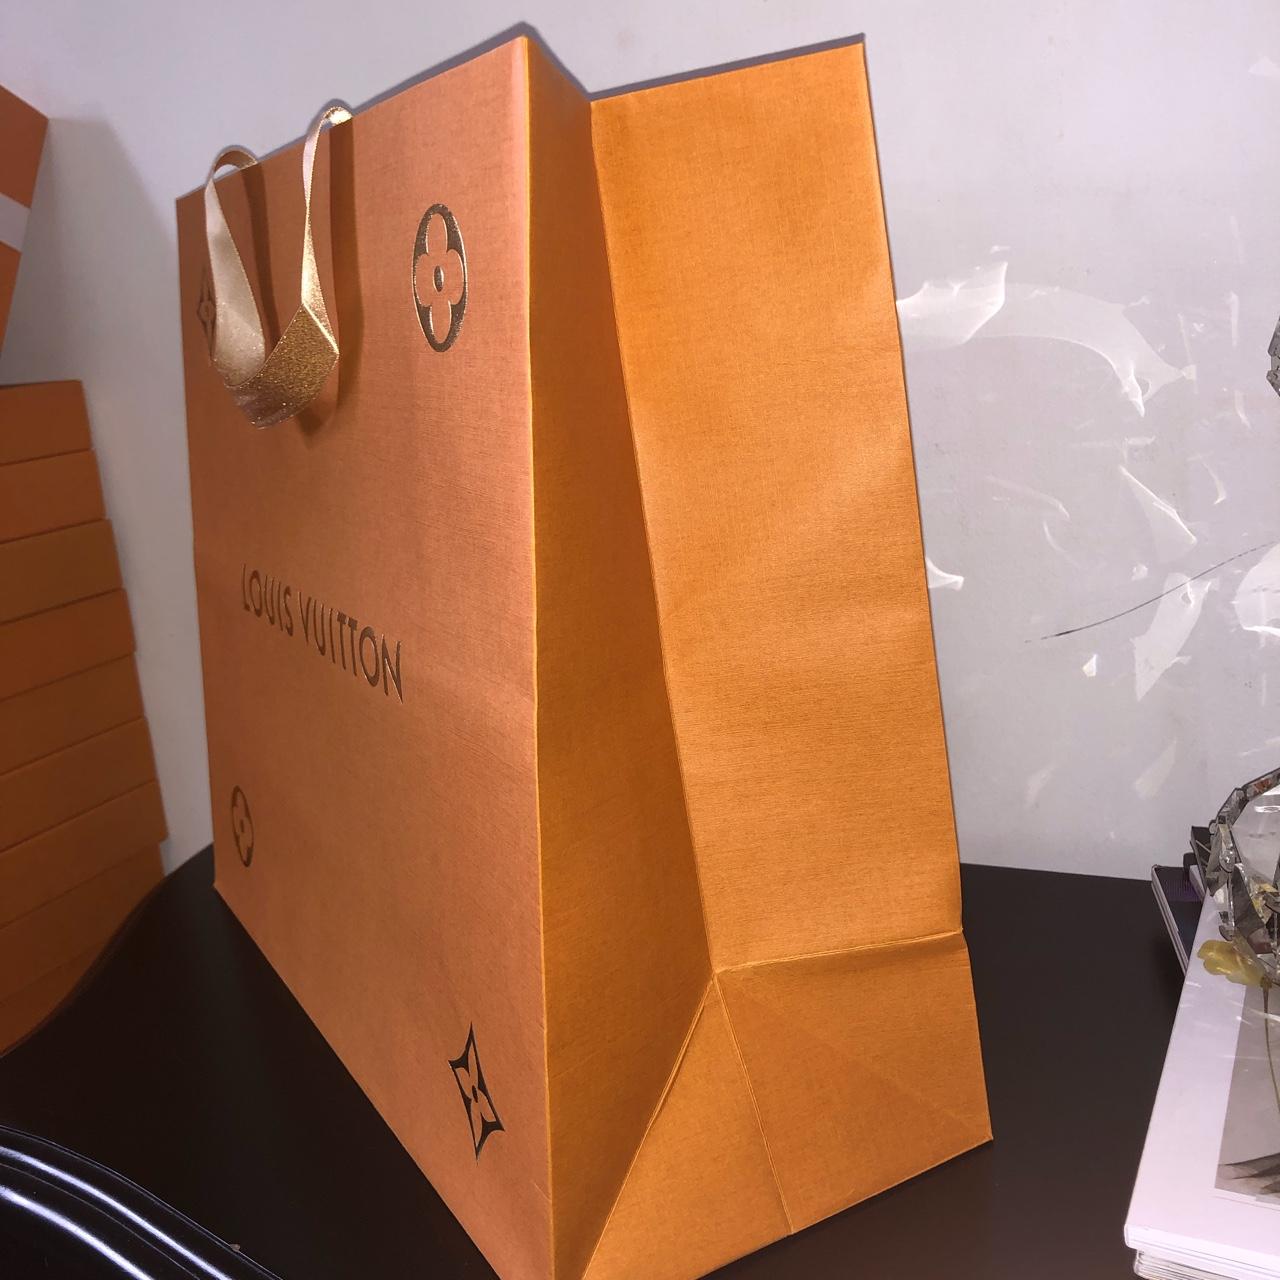 🔥Louis Vuitton Holiday Special Limited Edition Collectible GIANT Gift Bag